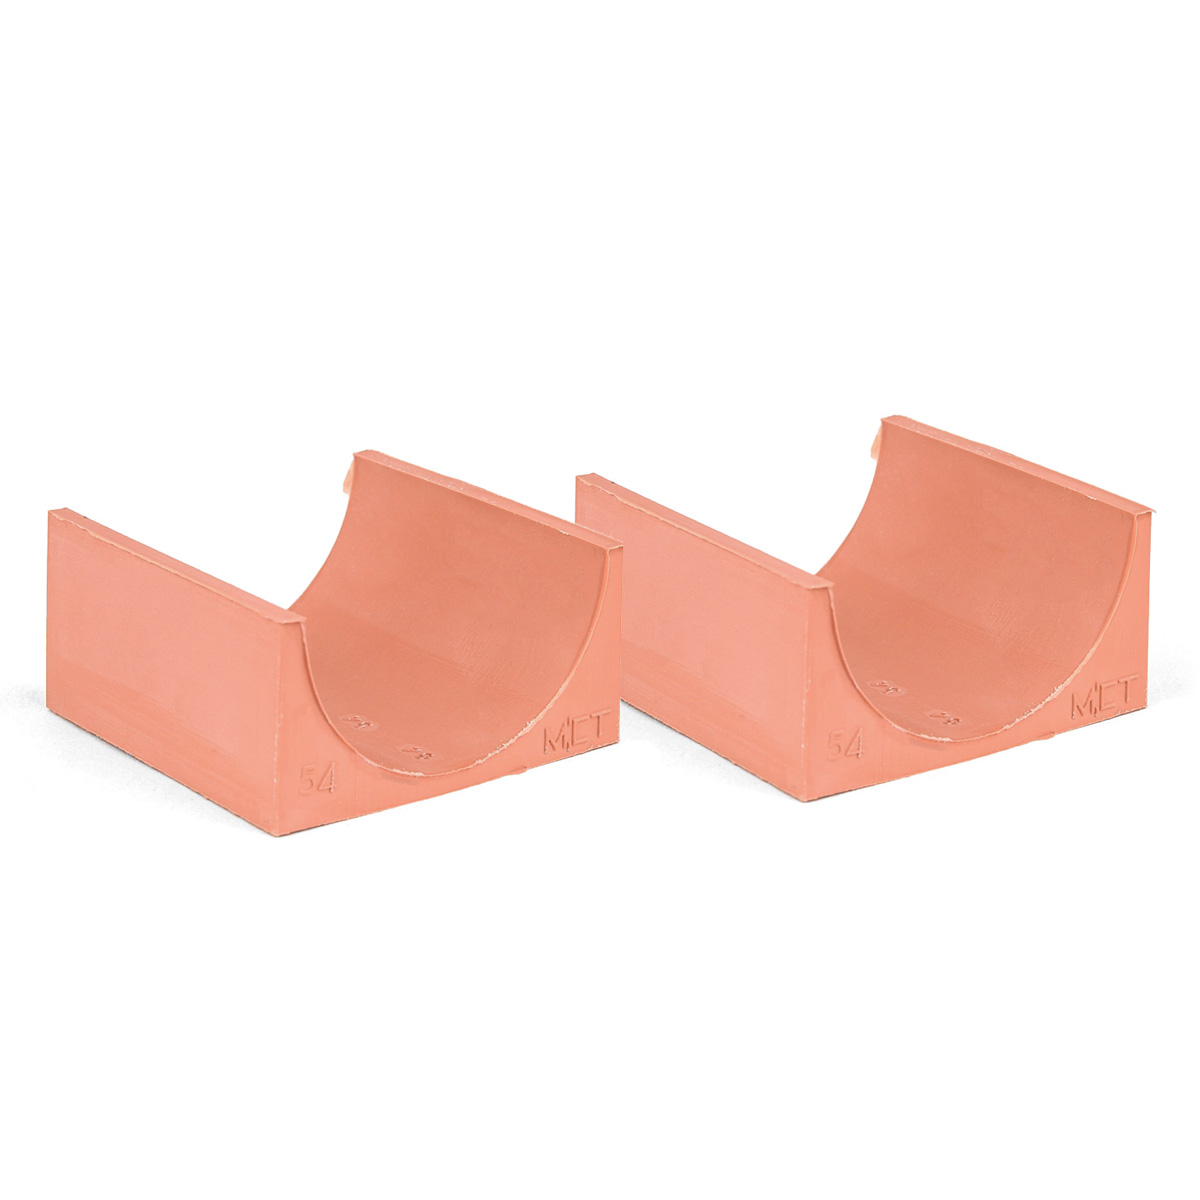 60-54*2 Set of 2 half insert block lycron, 60-54 for cable/pipe diam. 53.5-55.5mm